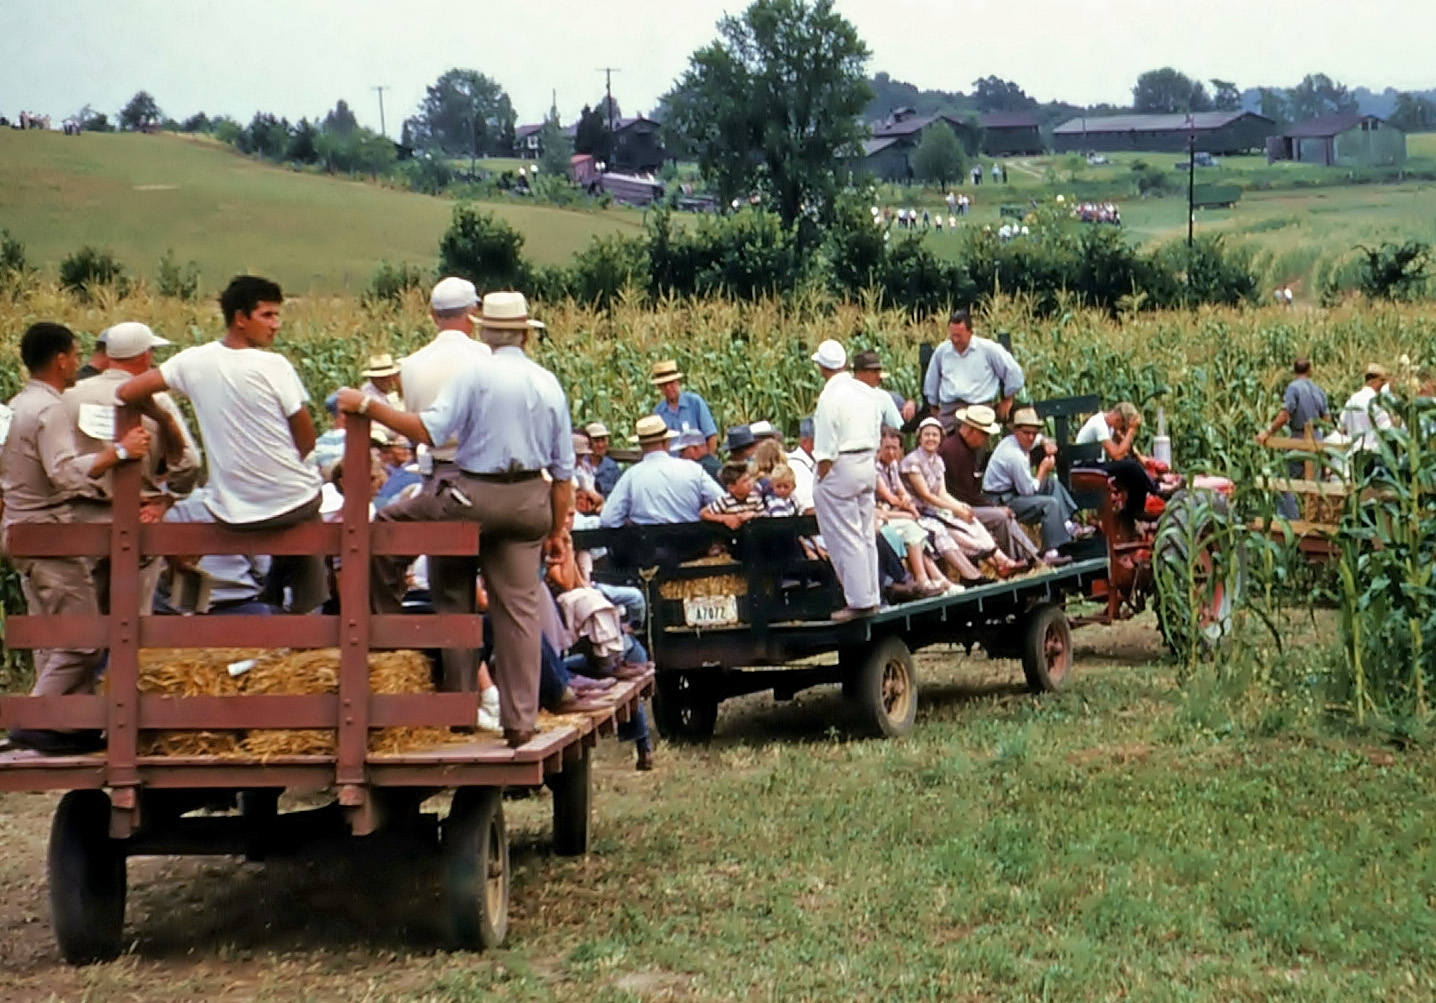 Hay wagons taking visitors to a local agricultural show on a farm in Coshocton County, Ohio in 1957.  From my grandfather's Kodachrome slides. View full size.